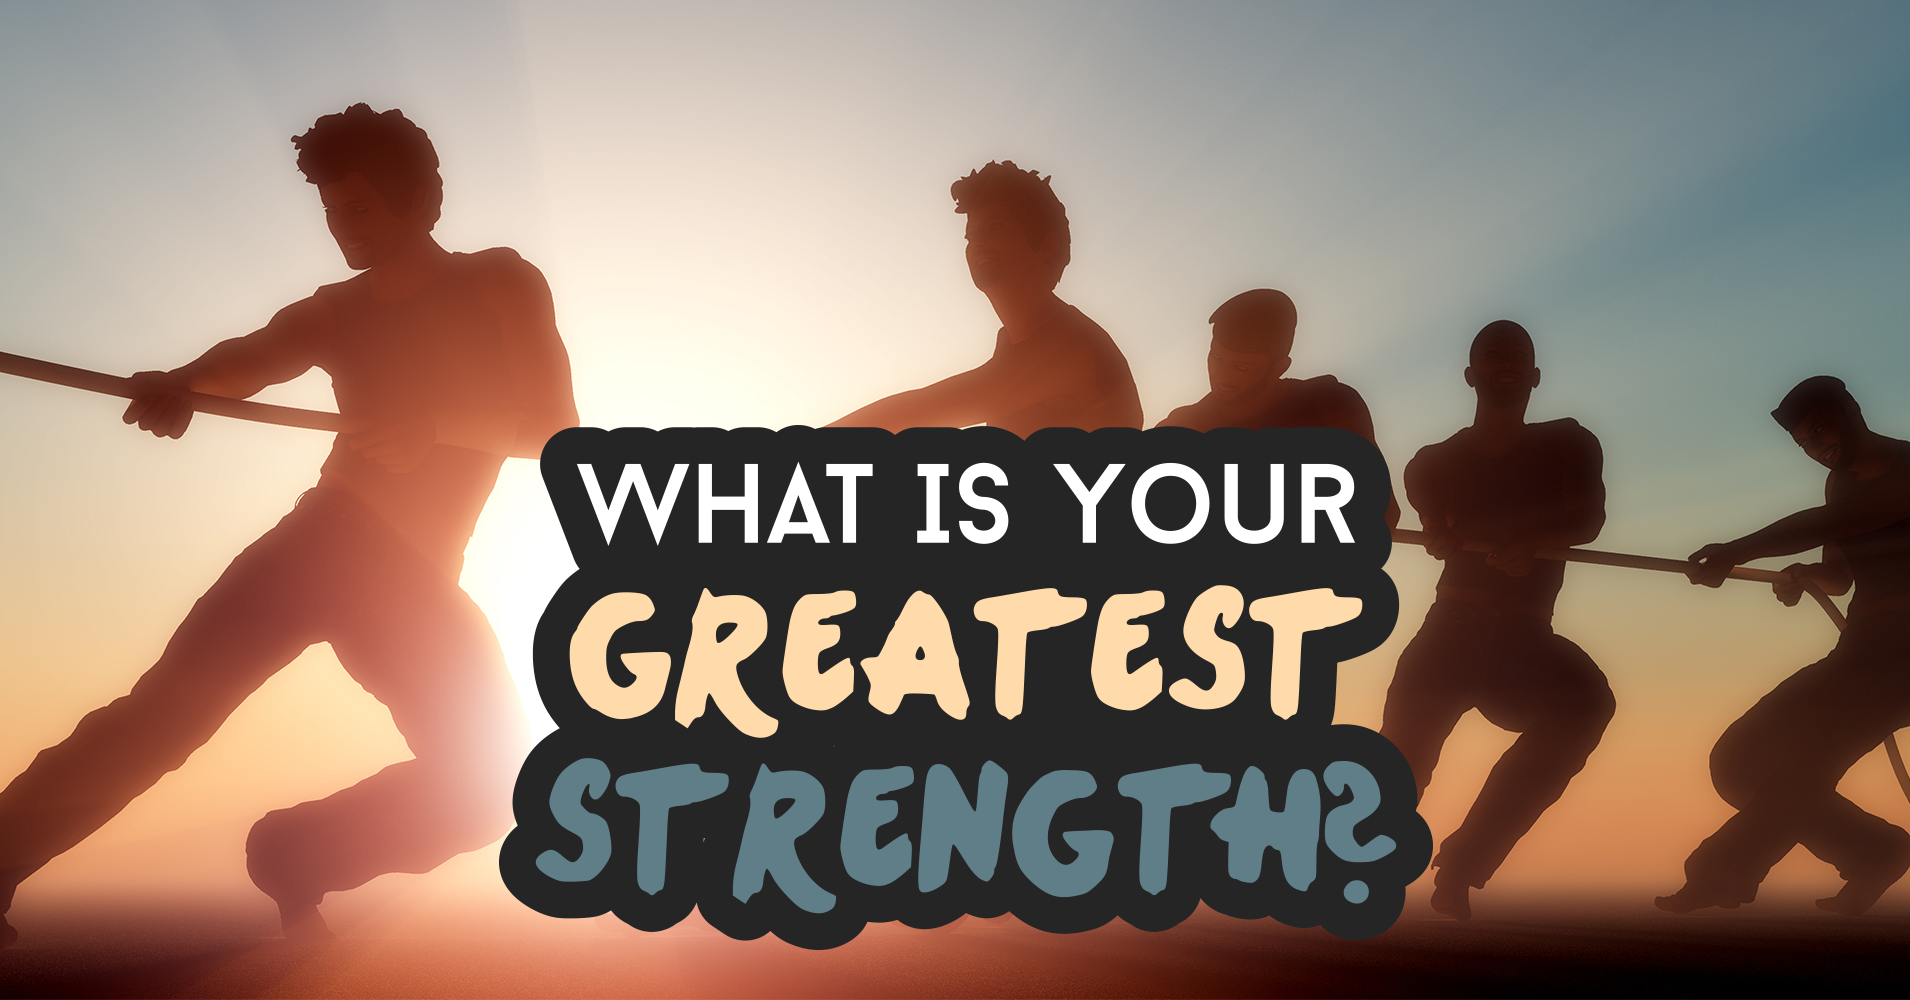 What Is Your Greatest Strength? - Quiz - Quizony.com